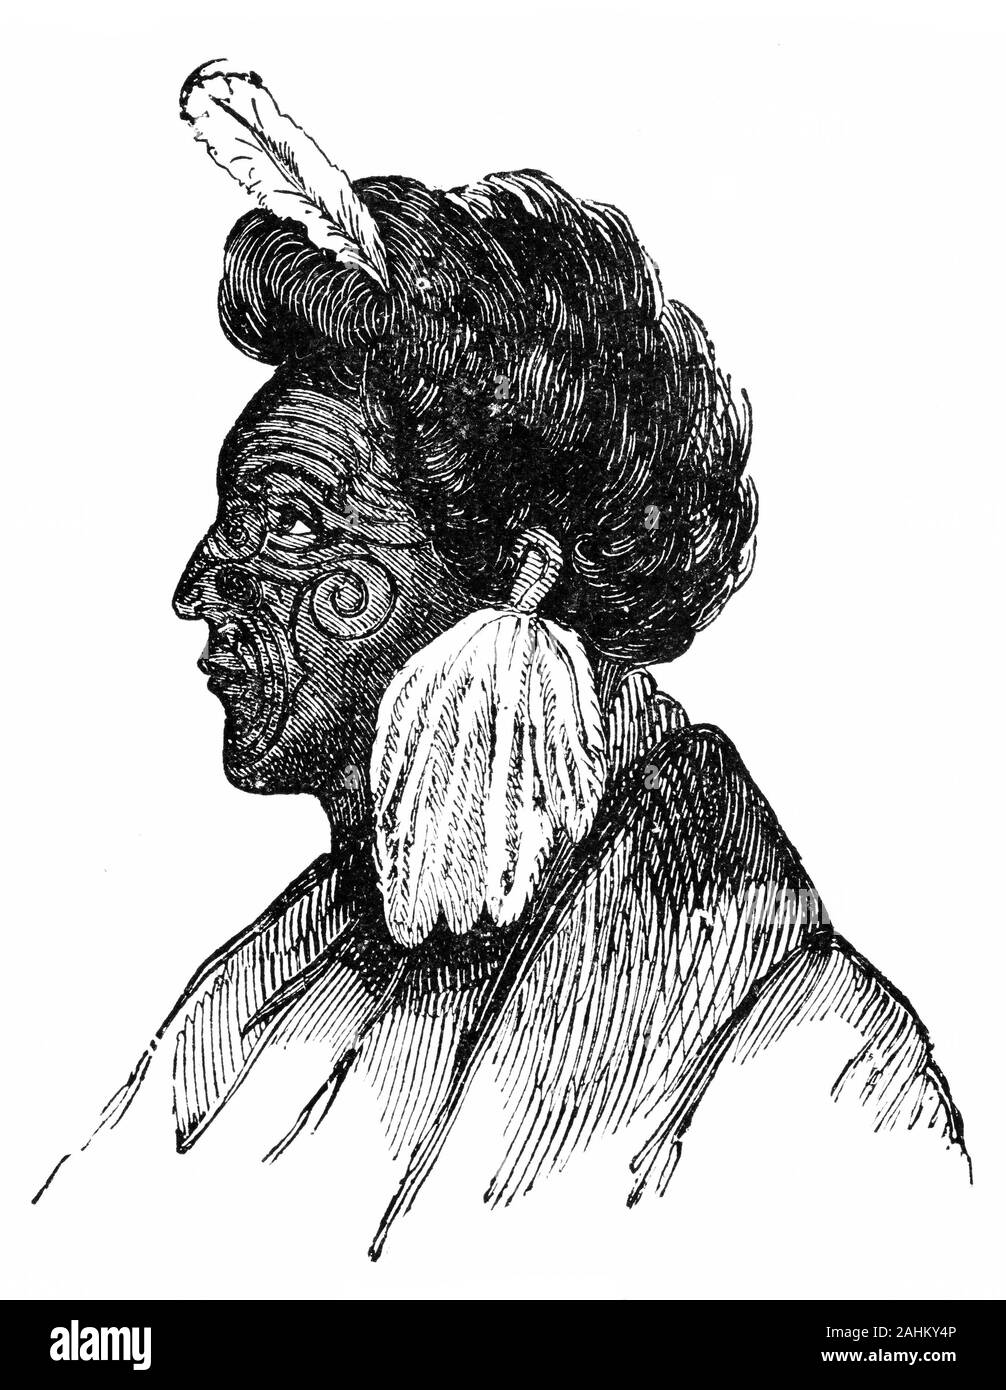 Engraved portrait of Te Rauparaha (1760s – 1849) a Māori rangatira (chief) and war leader of the Ngāti Toa tribe who took a leading part in the Musket Wars in New Zealand. He was influential in the original sale of land to the New Zealand Company and was a participant in the Wairau Affray in Marlborough. Stock Photo